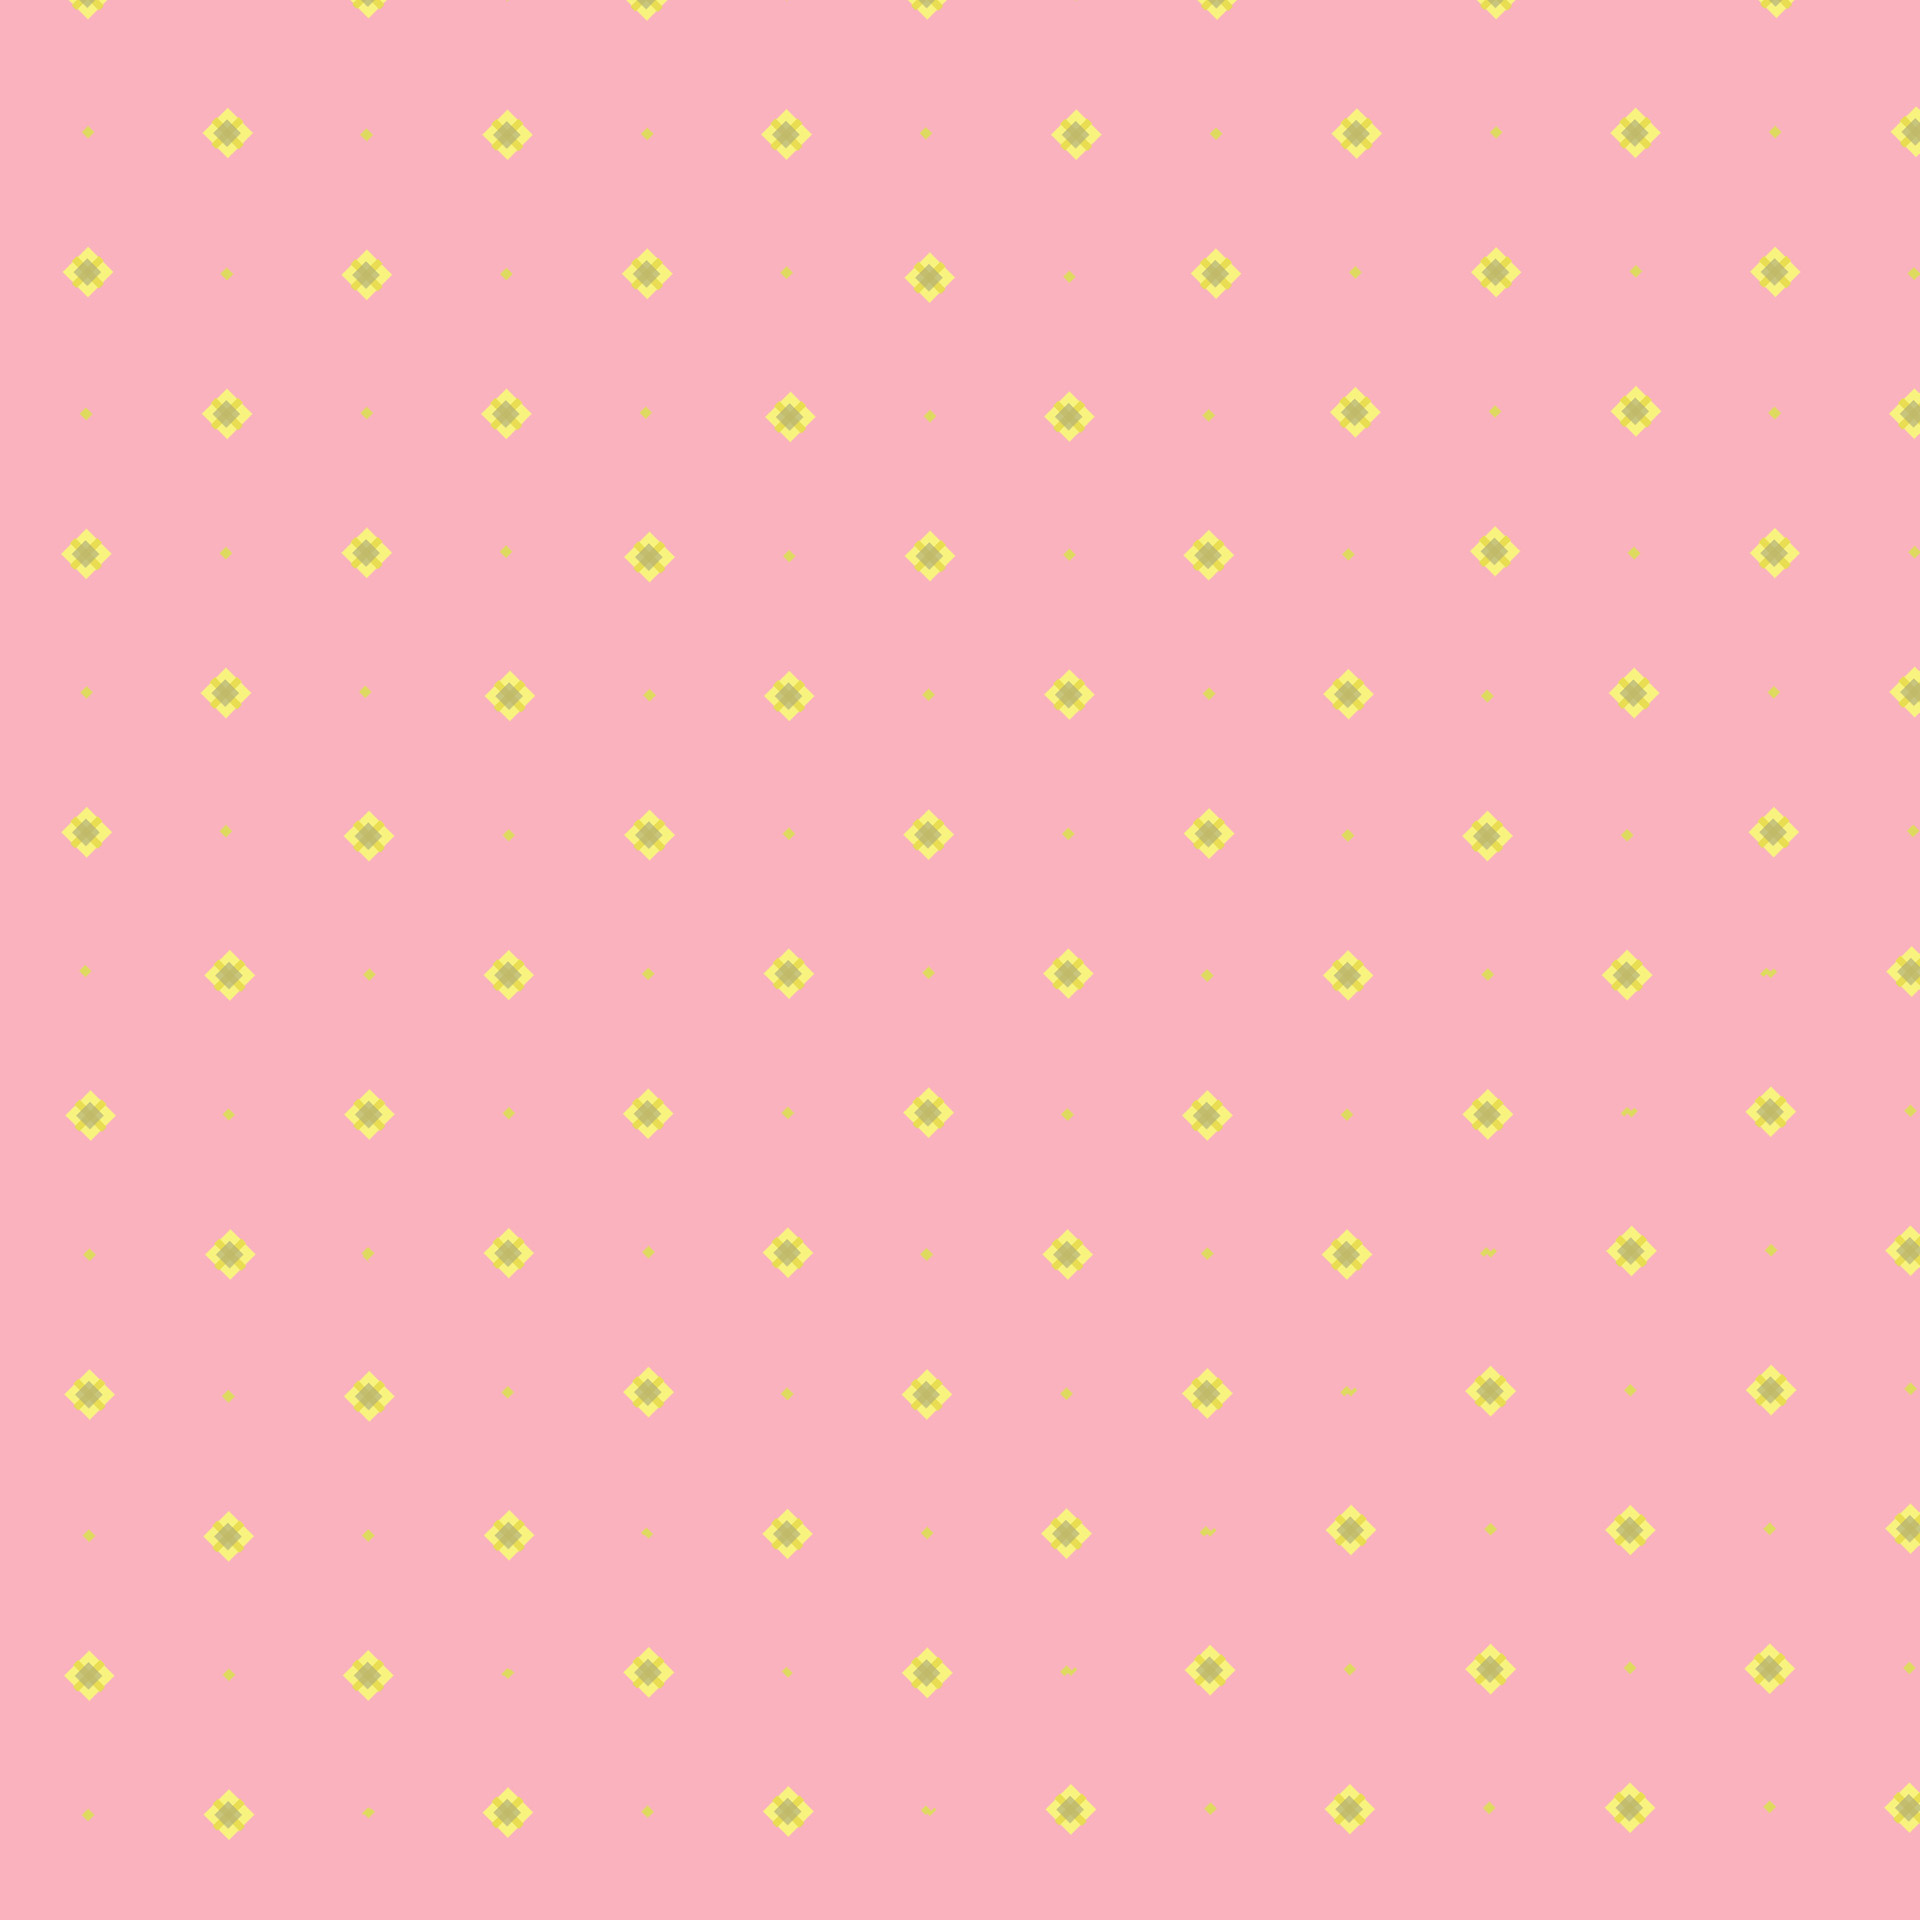 quilted pink background free photo